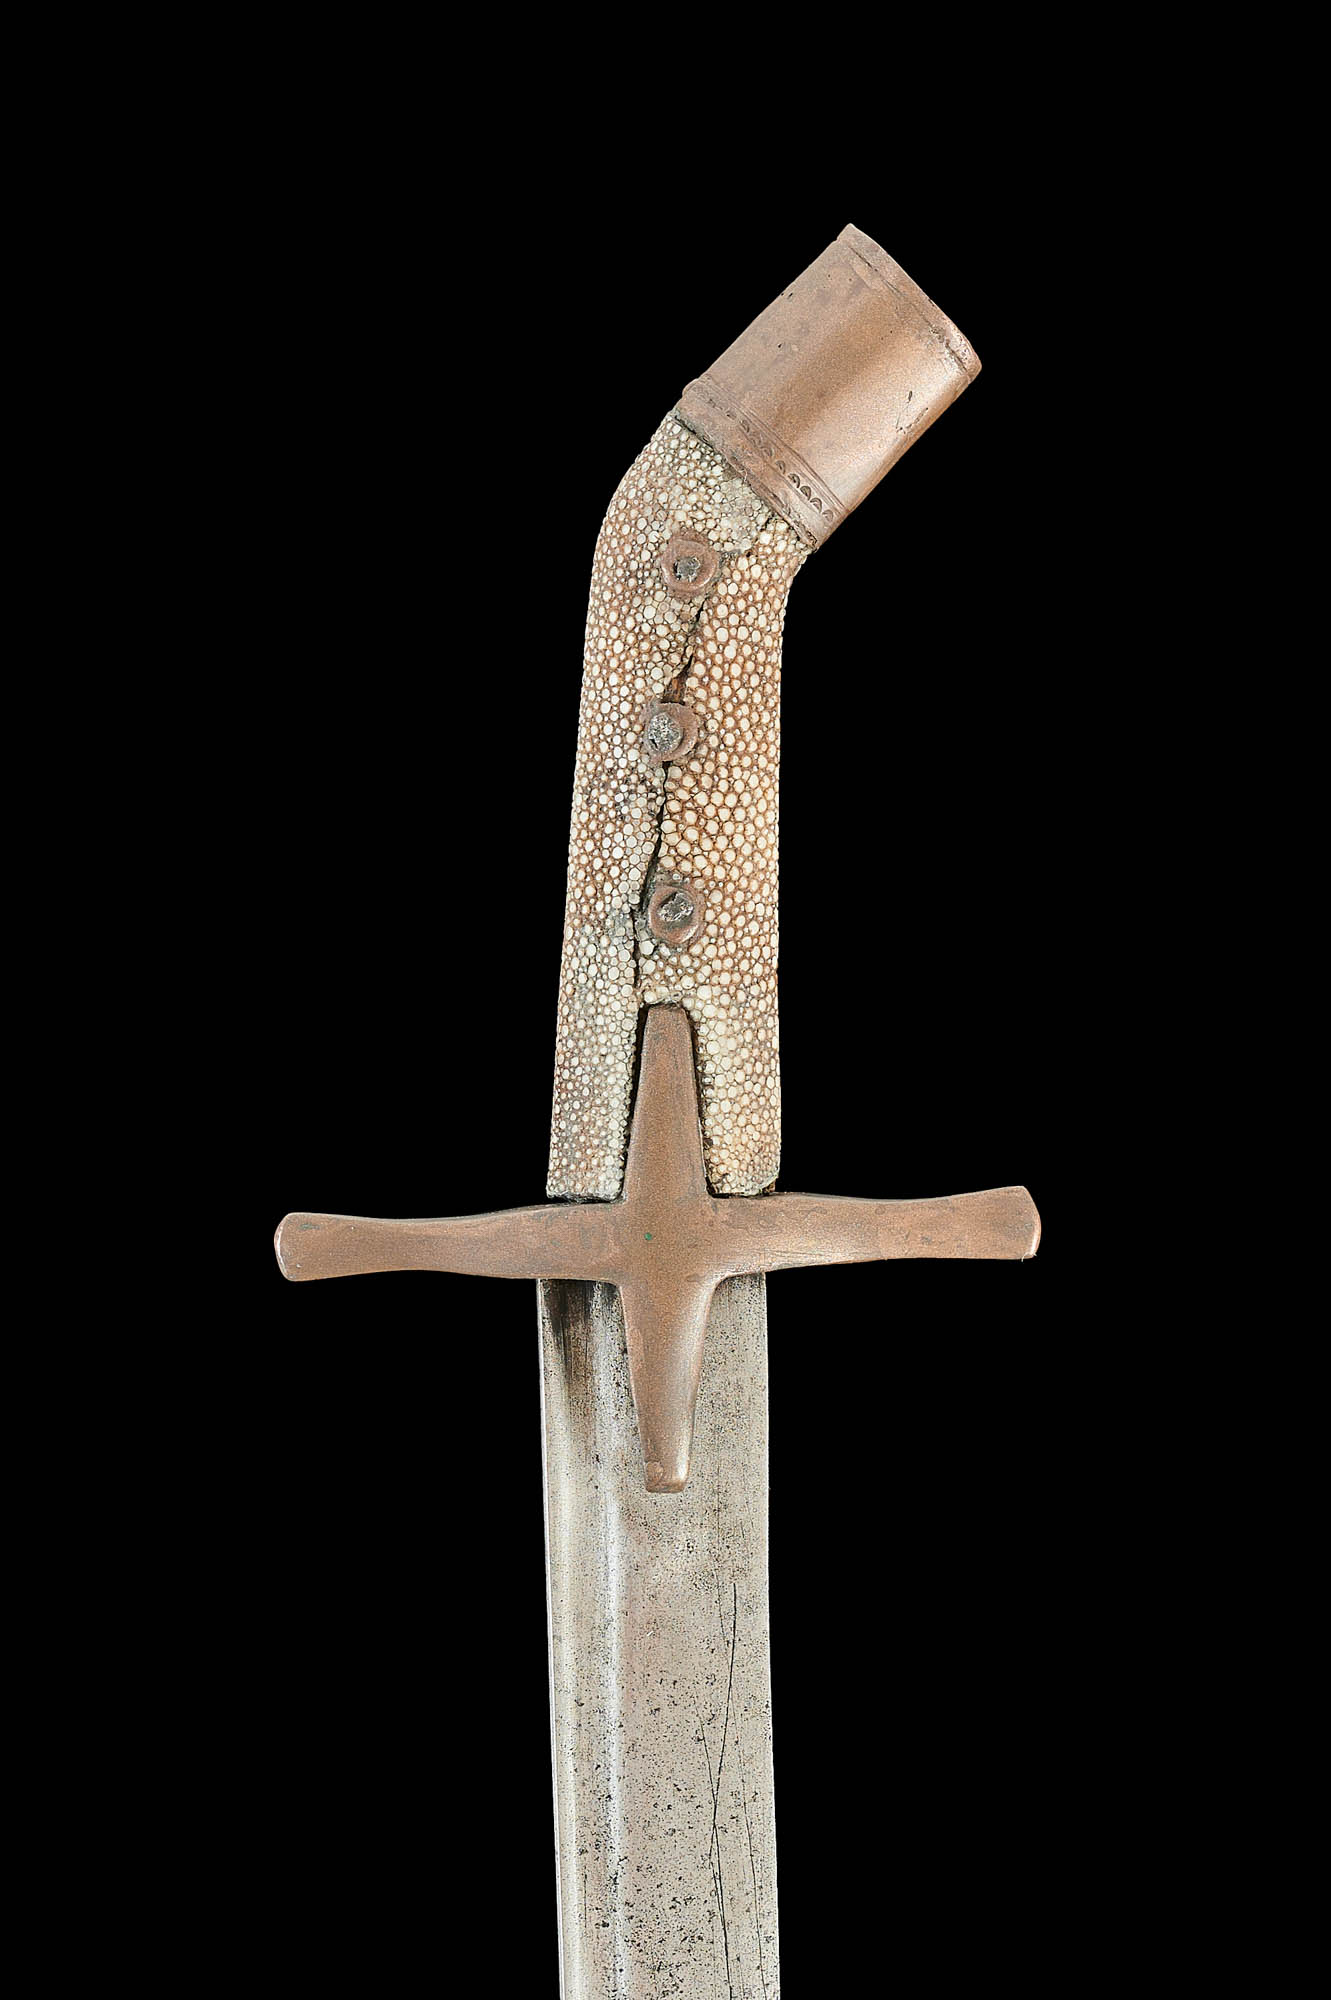 TATAR SABER SWORD DECORATED WITH RHOMBS - Image 12 of 21